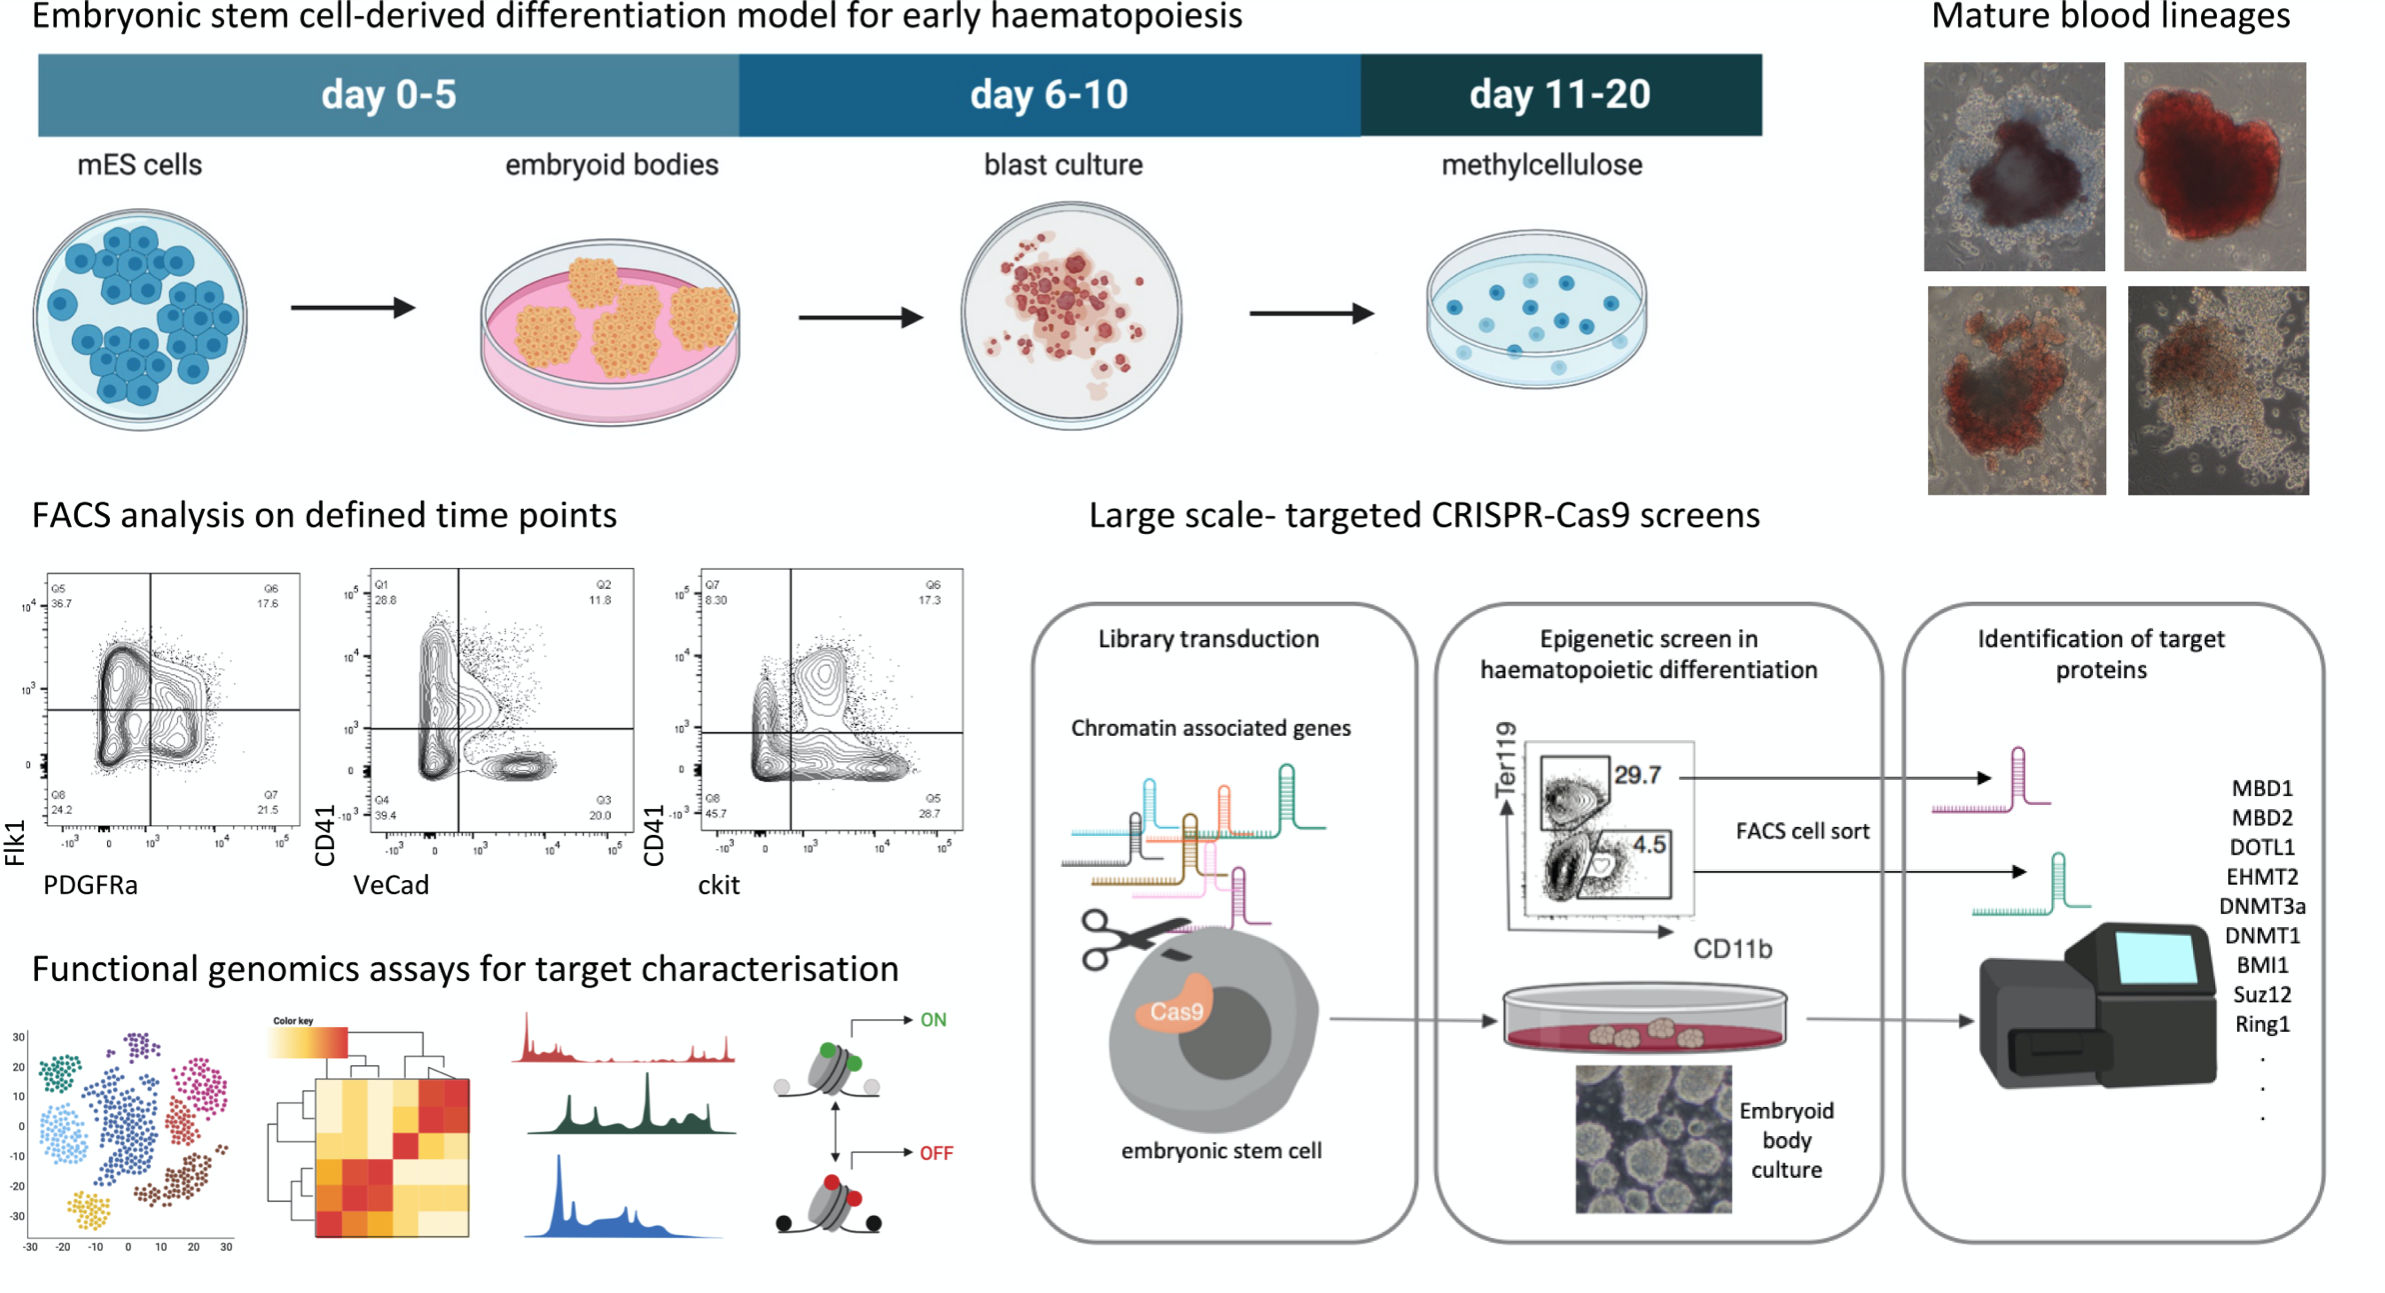 Embryonic stem cell-derived differentiation model